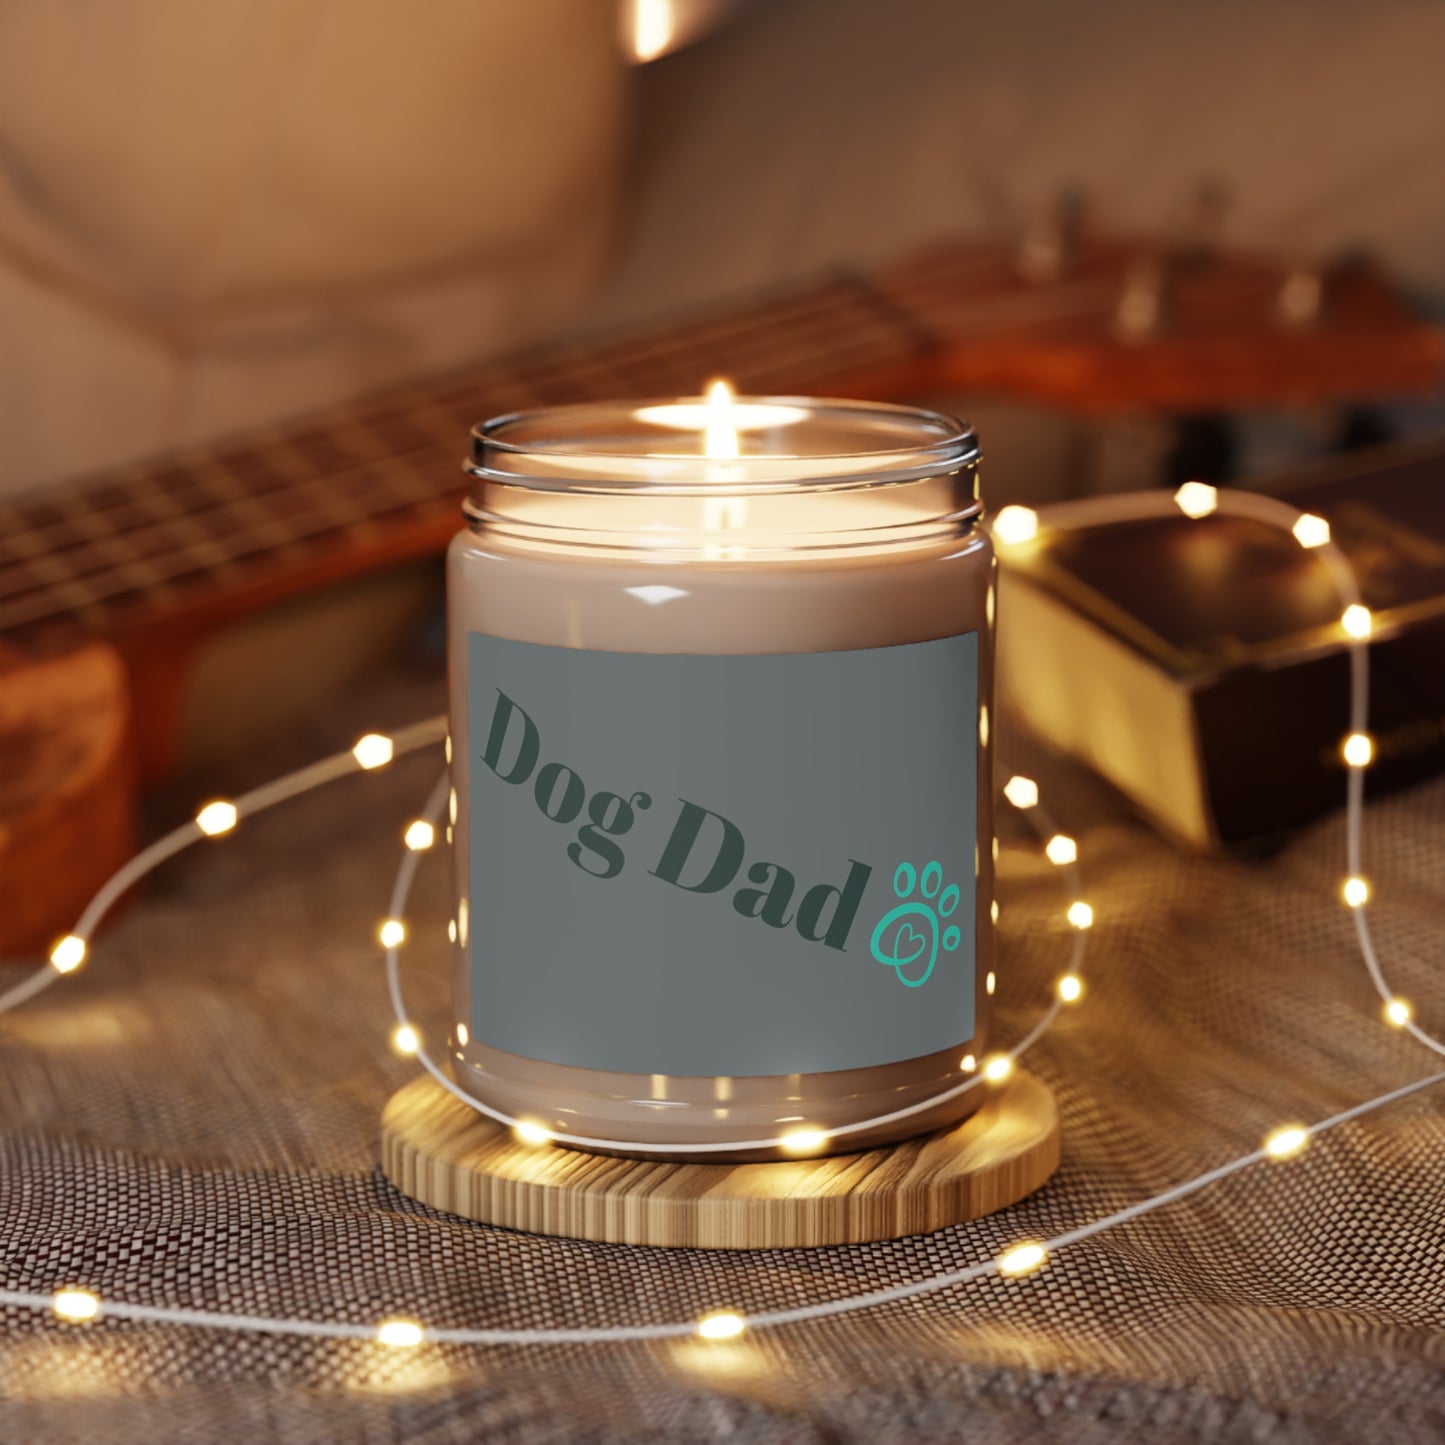 Dog Dad Scented Candles, 9oz